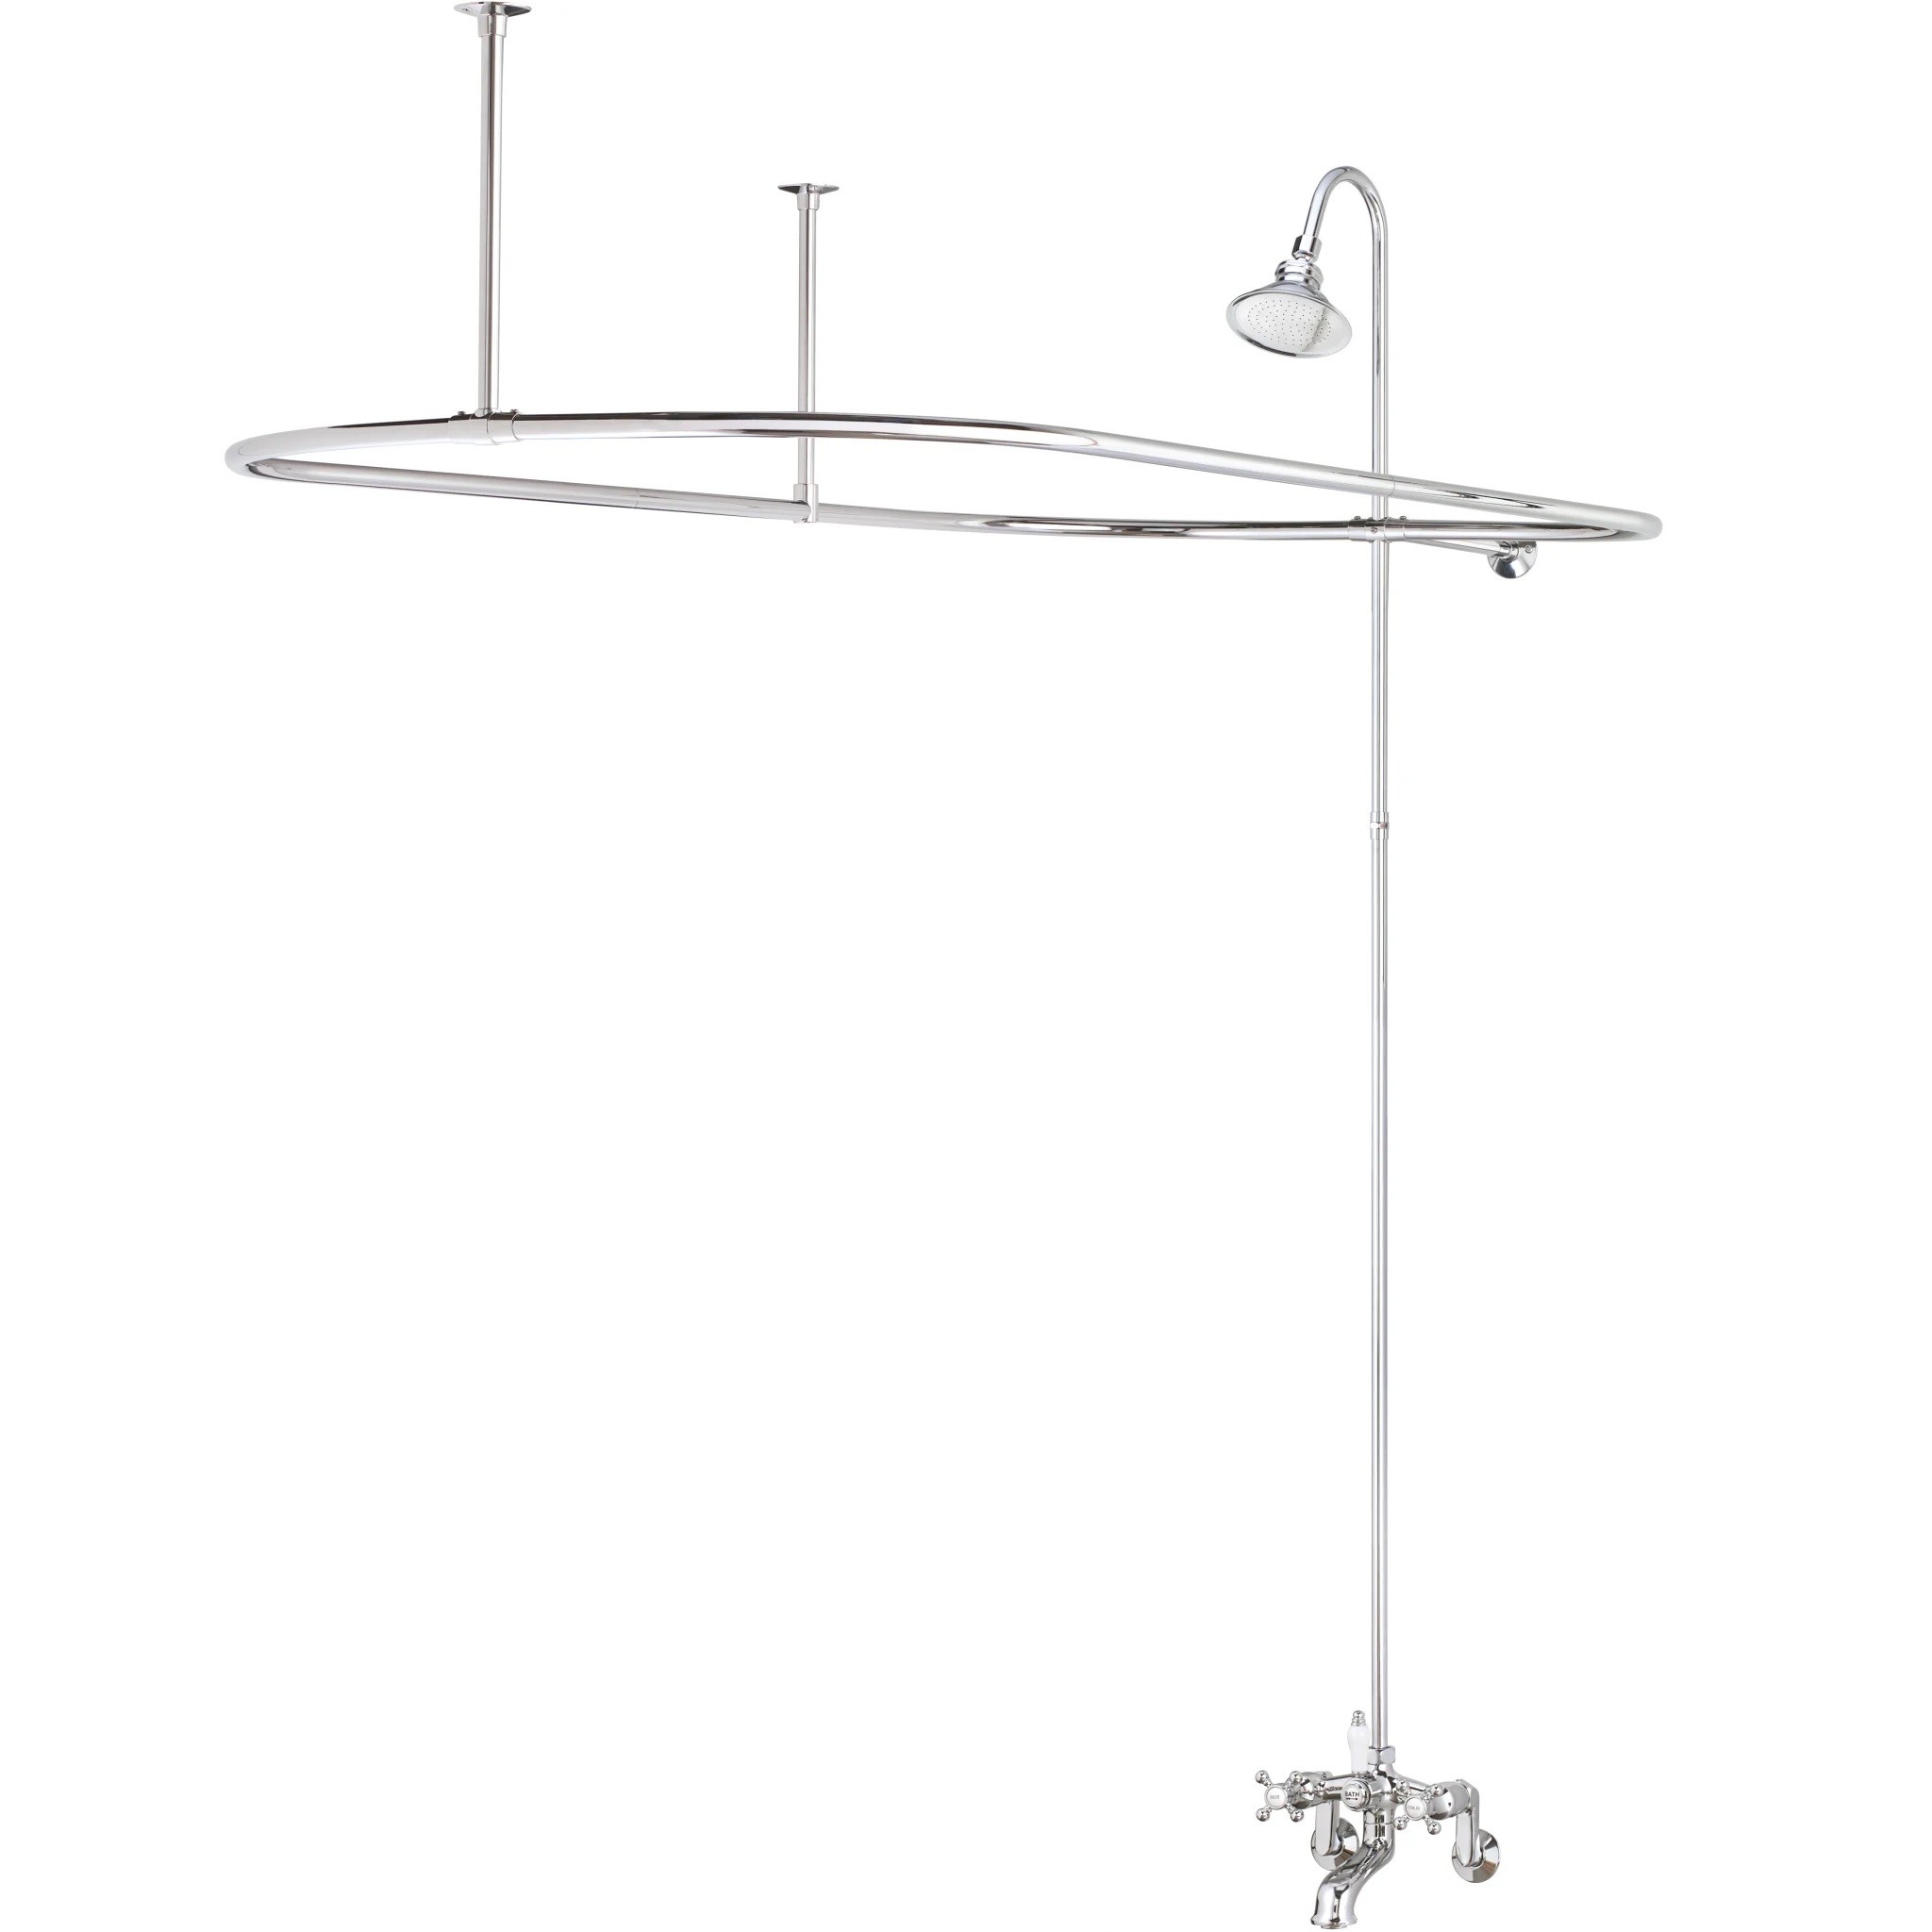 CHEVIOT 5182-LEV LEVER HANDLES WALL-MOUNT TUB FILLER AND SHOWER COMBINATION WITH SHOWER CURTAIN